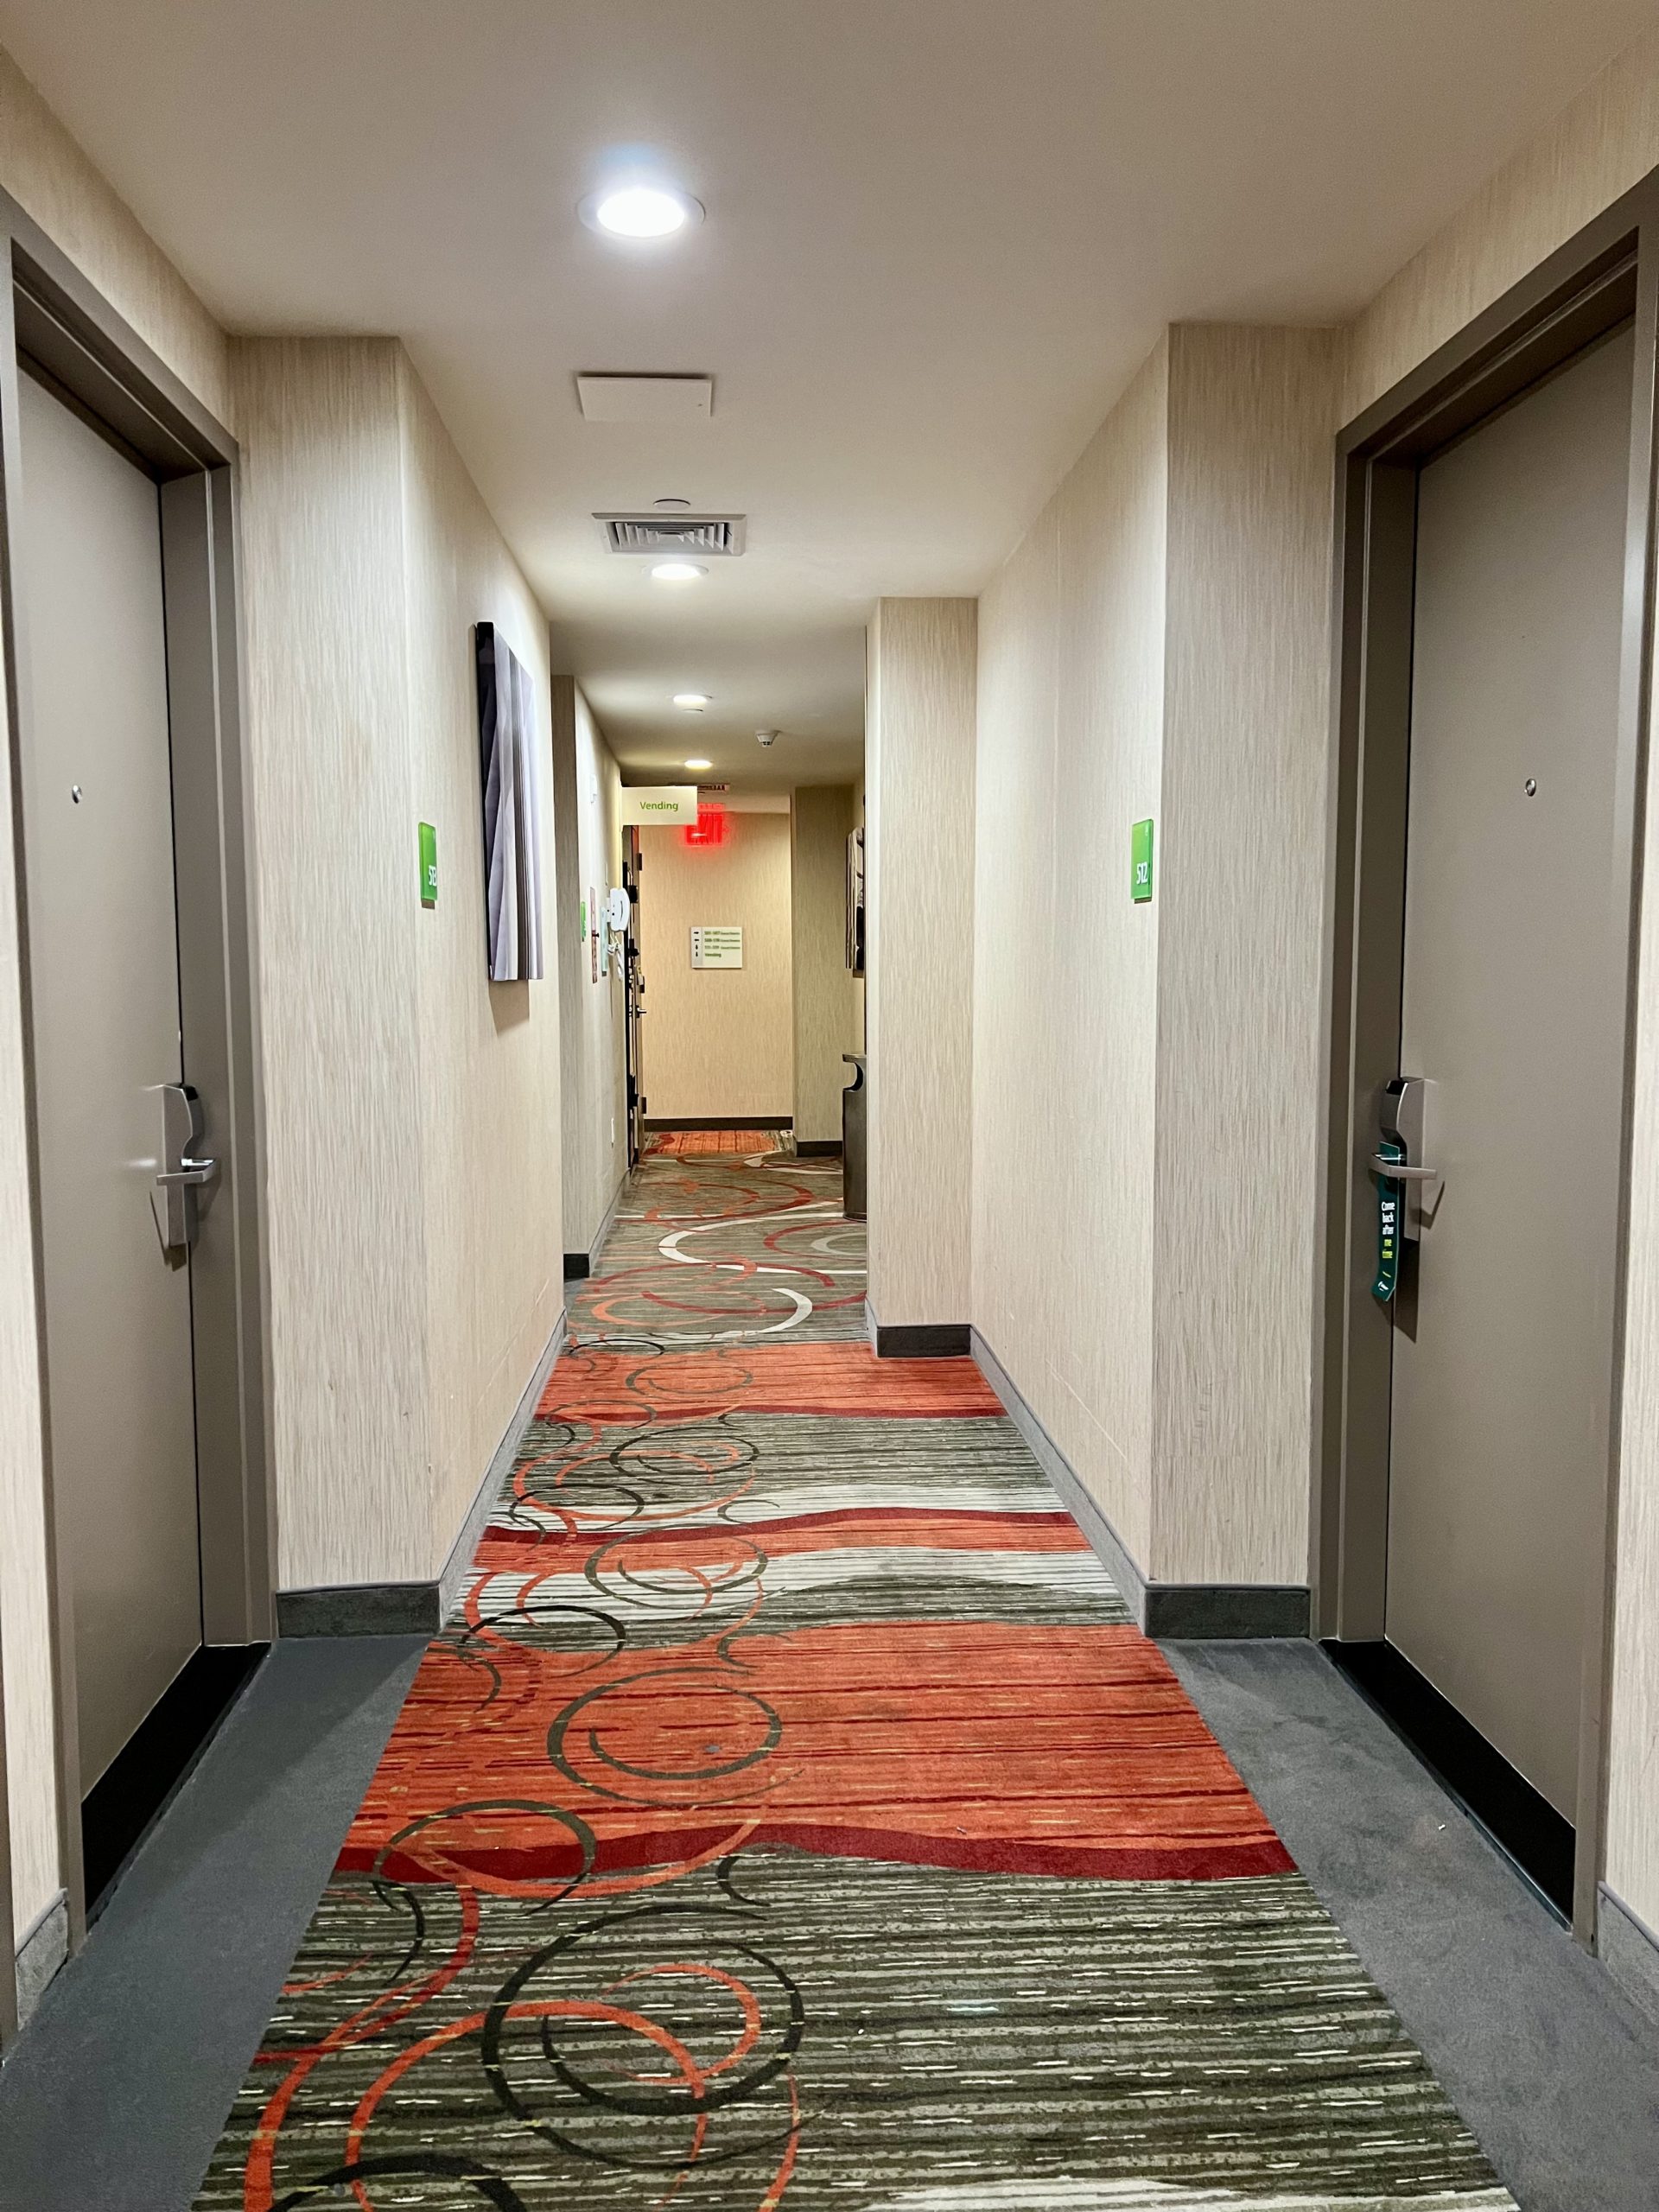 a hallway with colorful carpet and doors